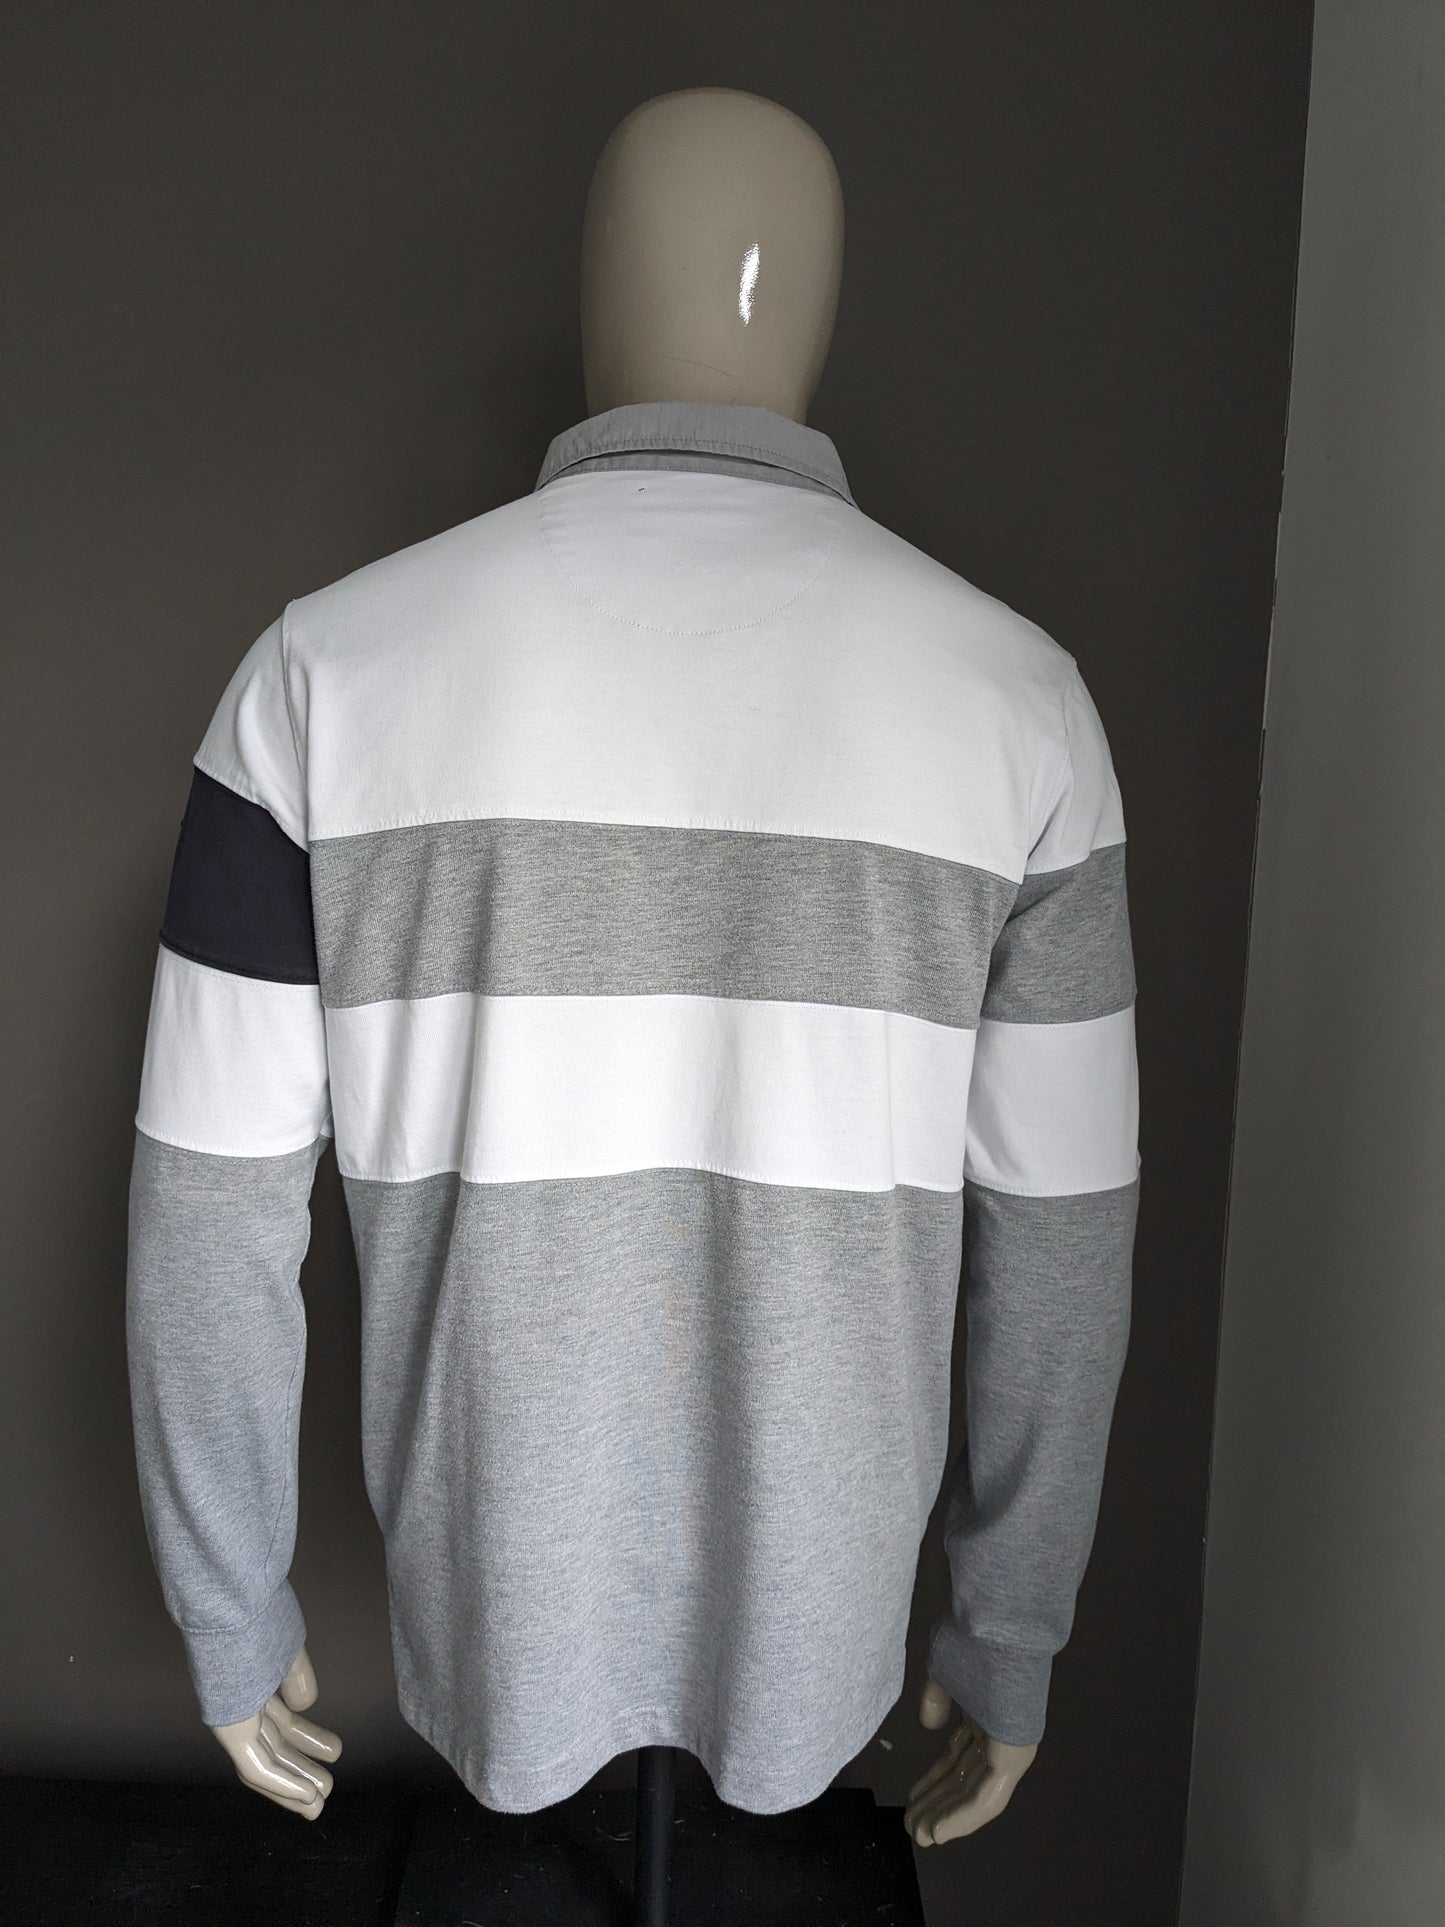 Pull Polo Christian Berg. Gris blanc rayé. Taille L.